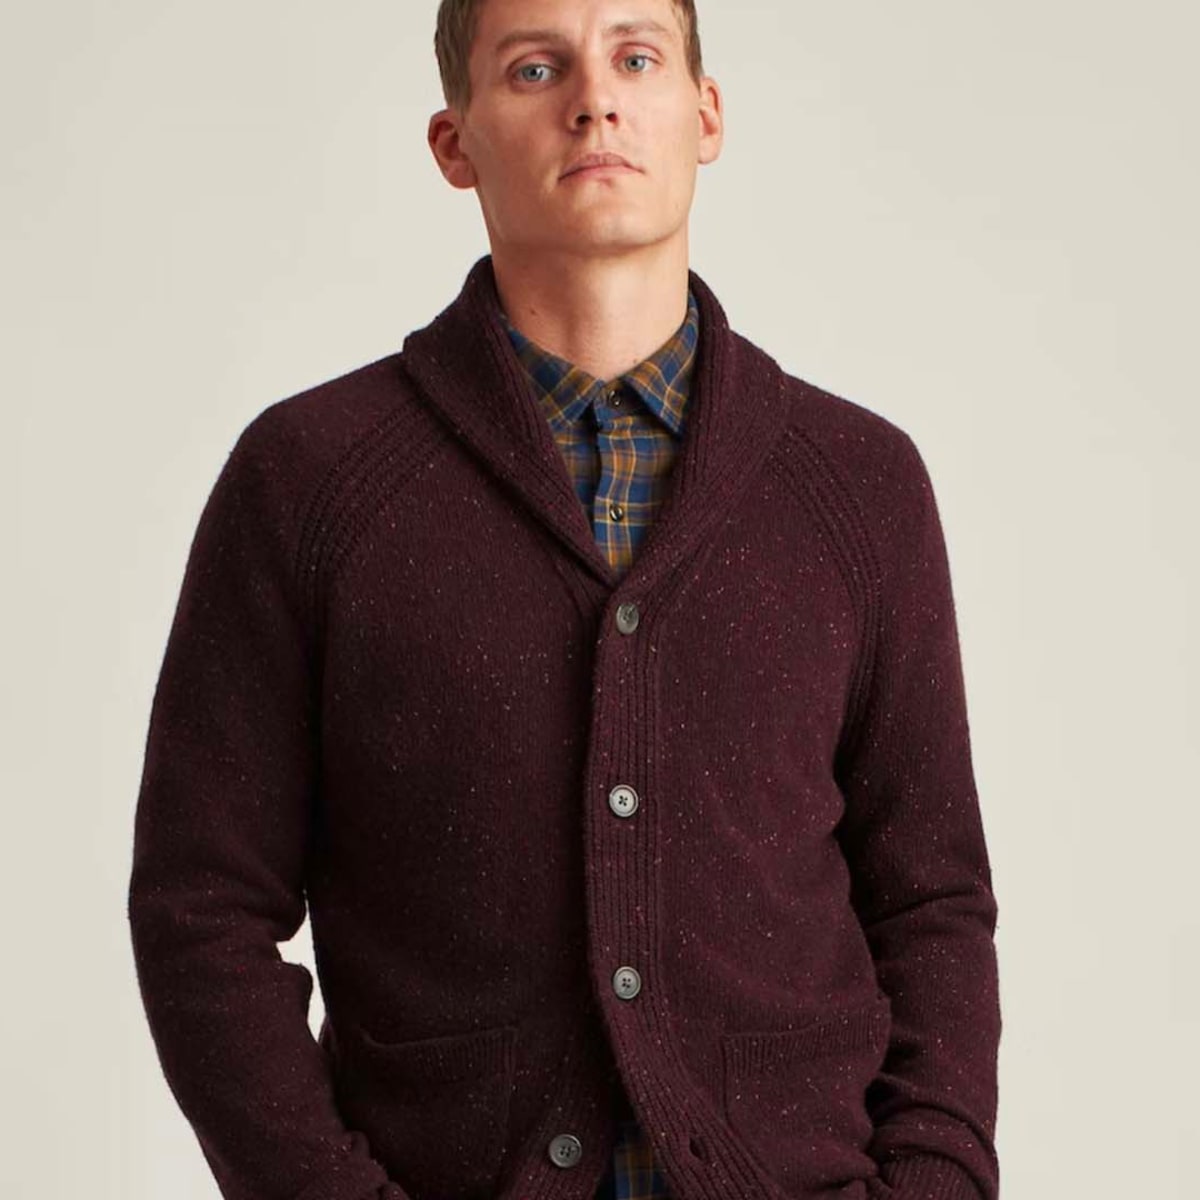 Old Town Shawl Cardigan in Navy